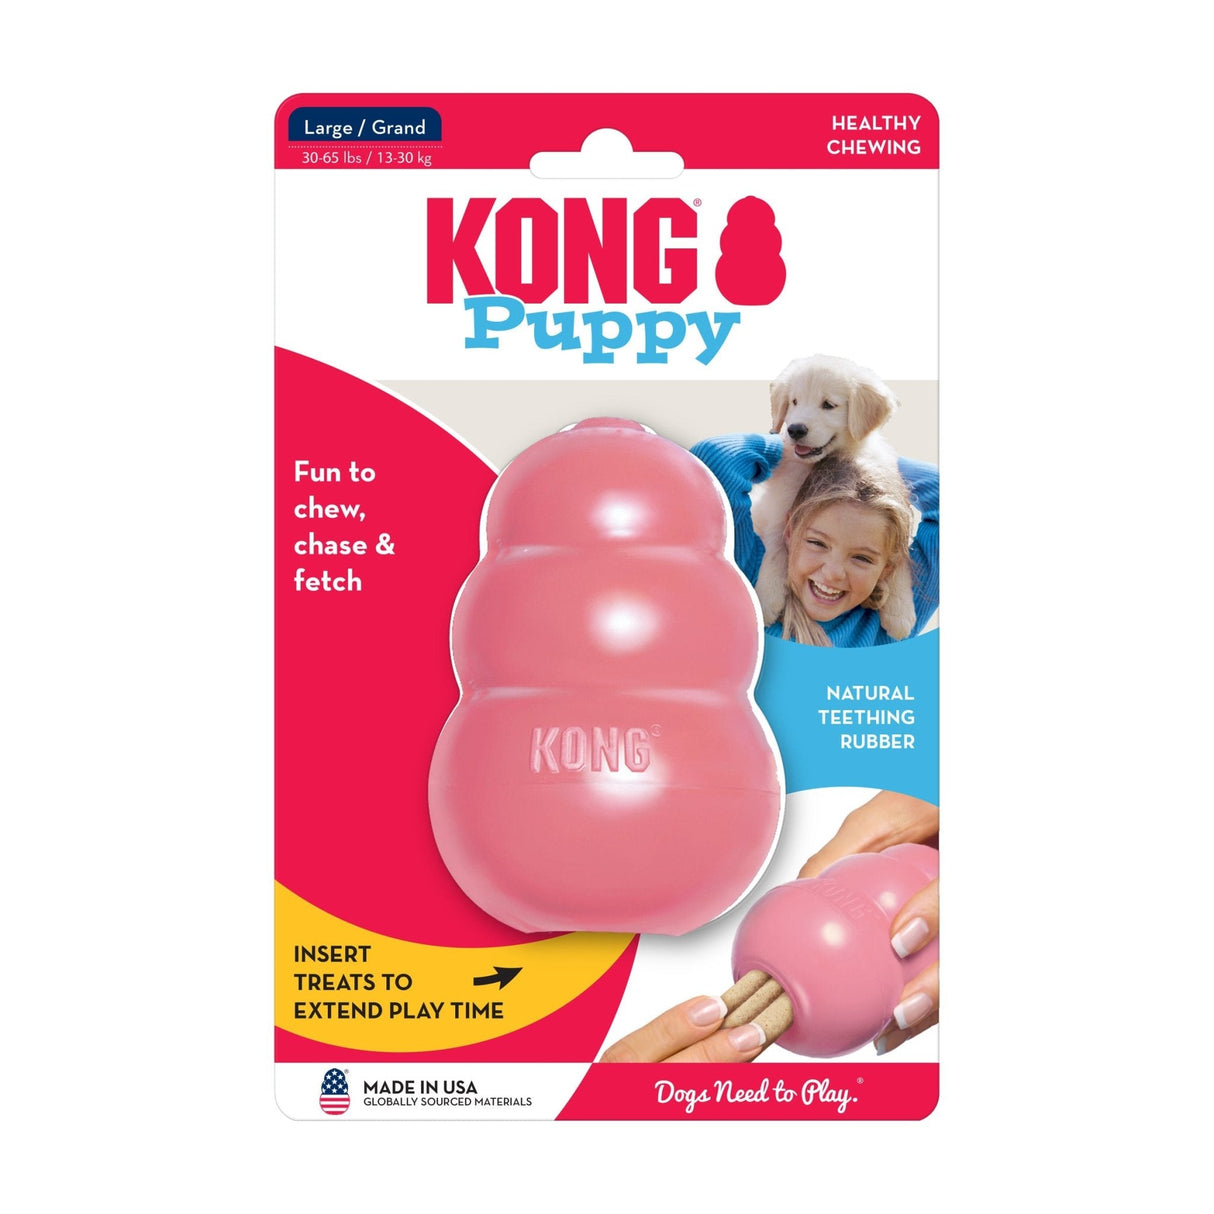 KONG Puppy Dog Toy - Ideal for Teething, Kong, Medium